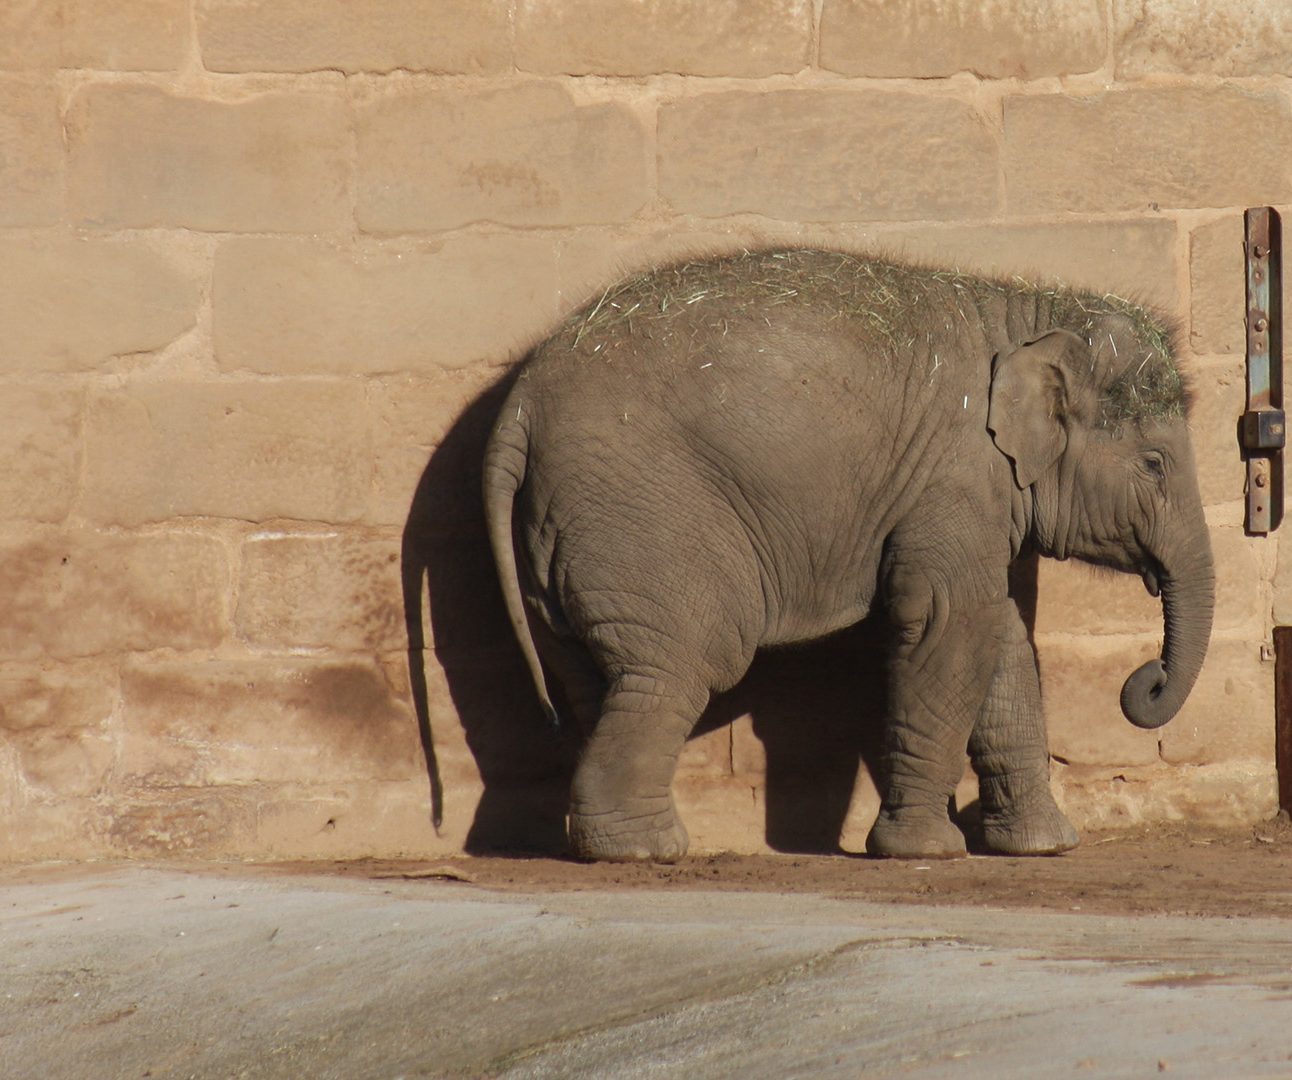 A young elephant stands against a wall on its own in a zoo enclosure